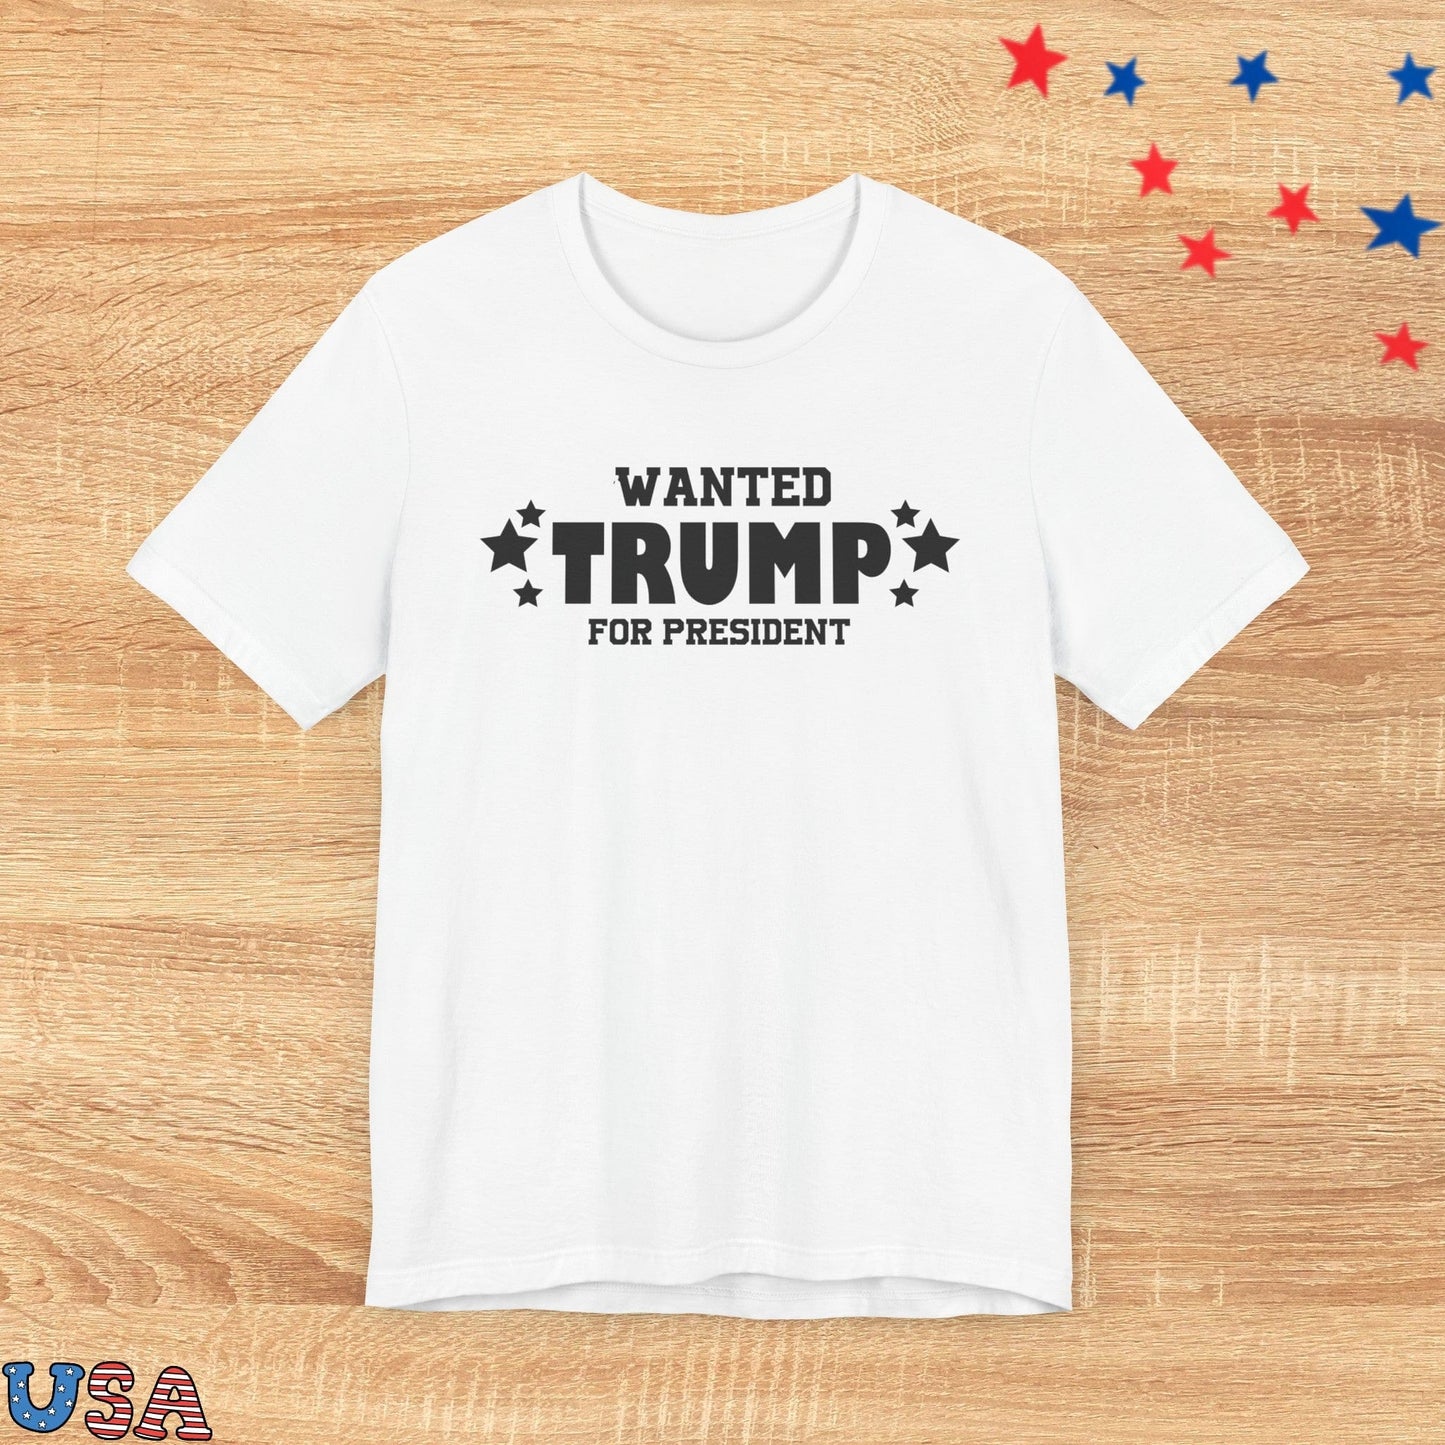 patriotic stars T-Shirt White / S Wanted Trump For President